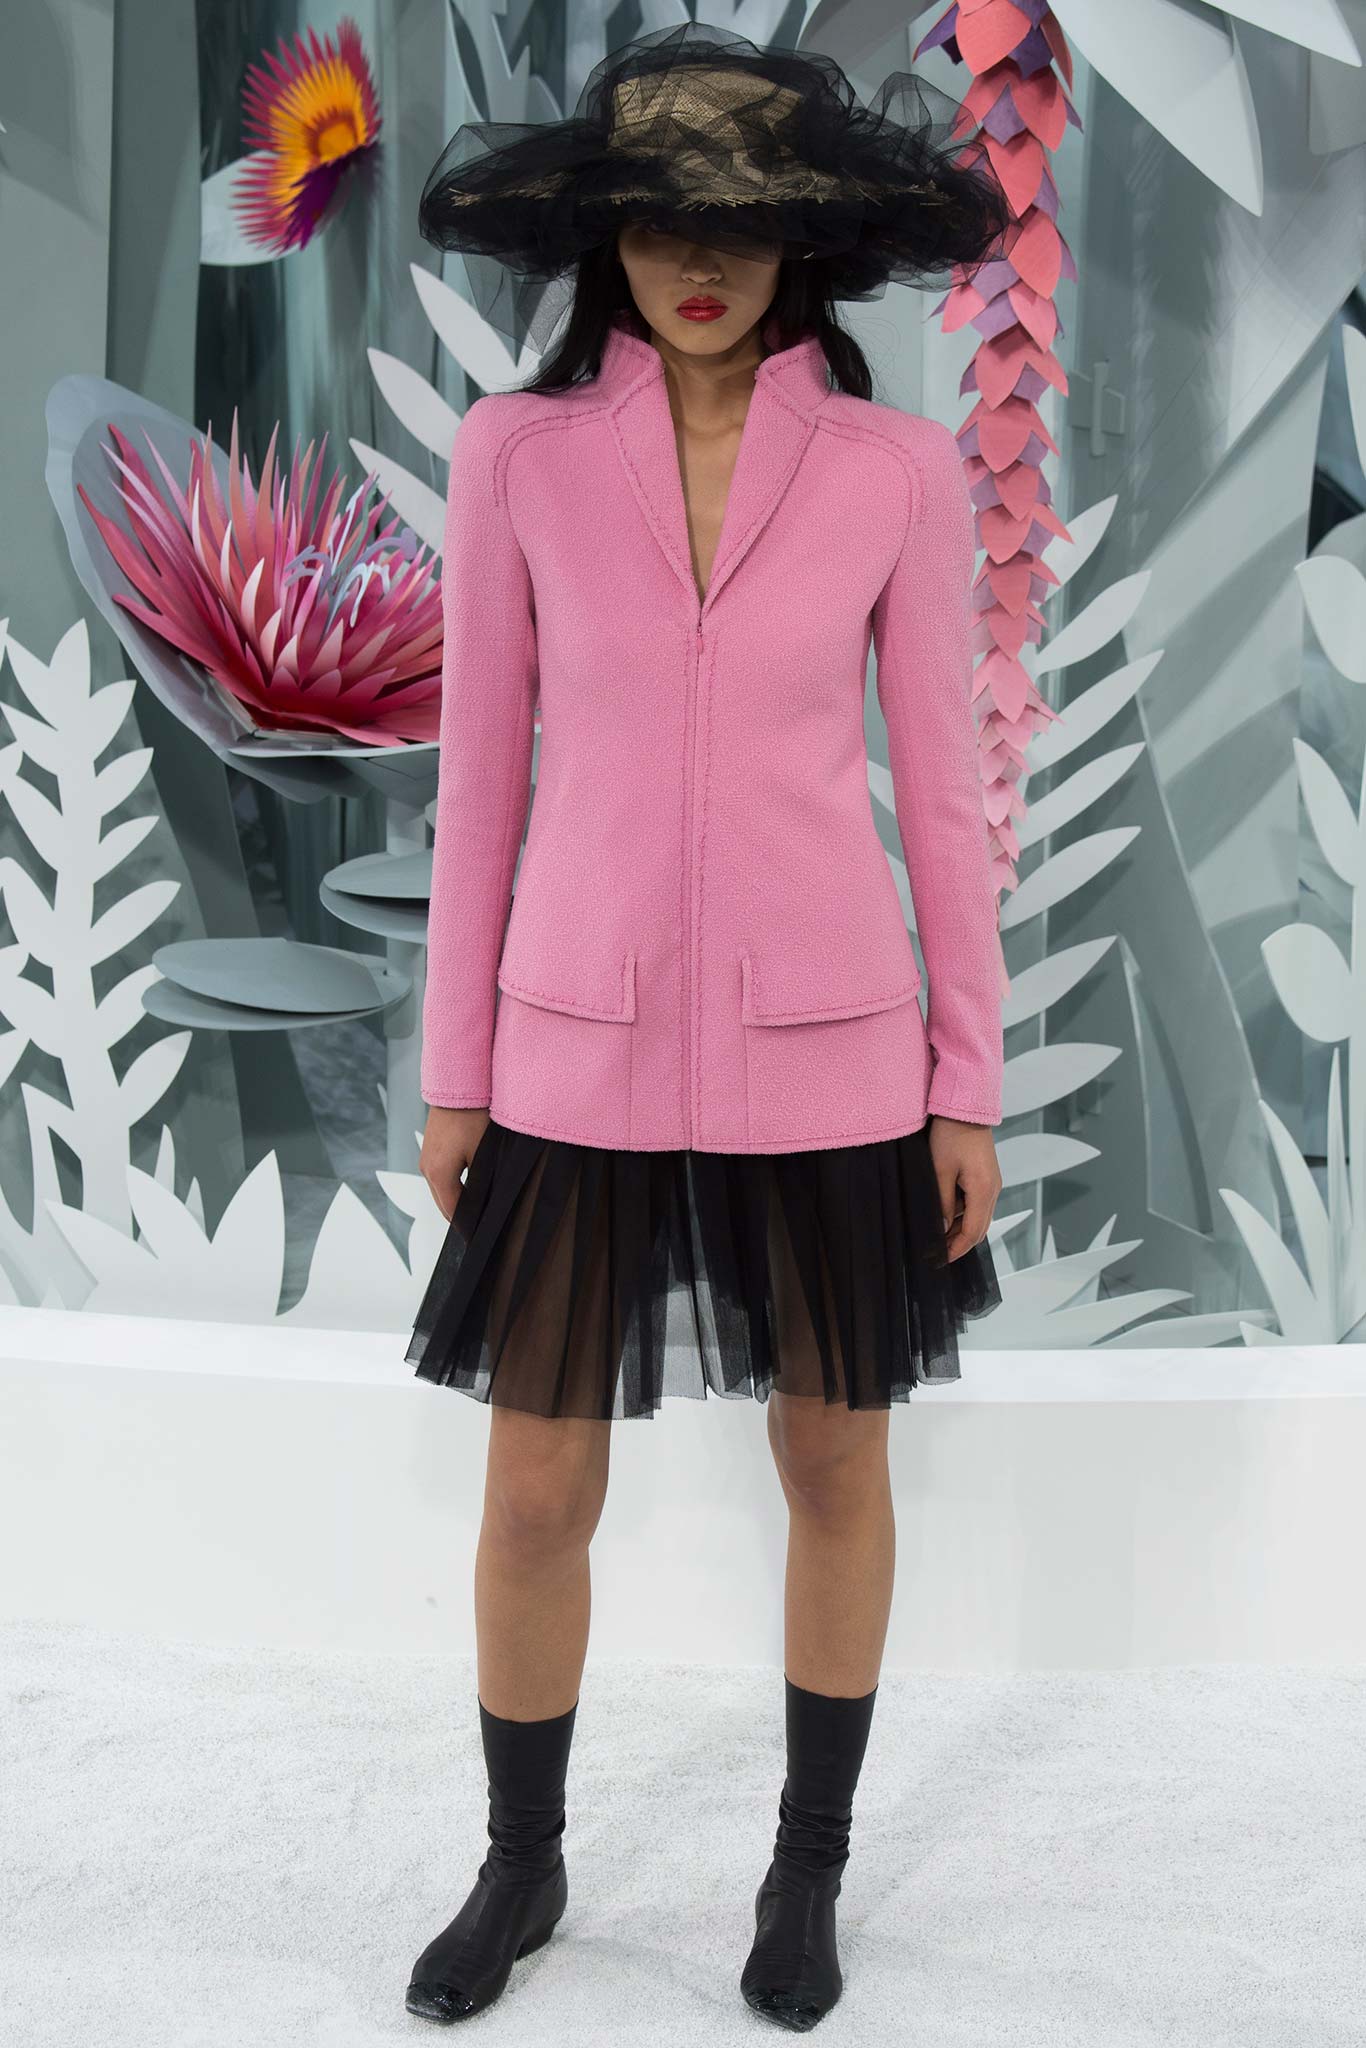 chanel-haute-couture-spring-2015-runway-show